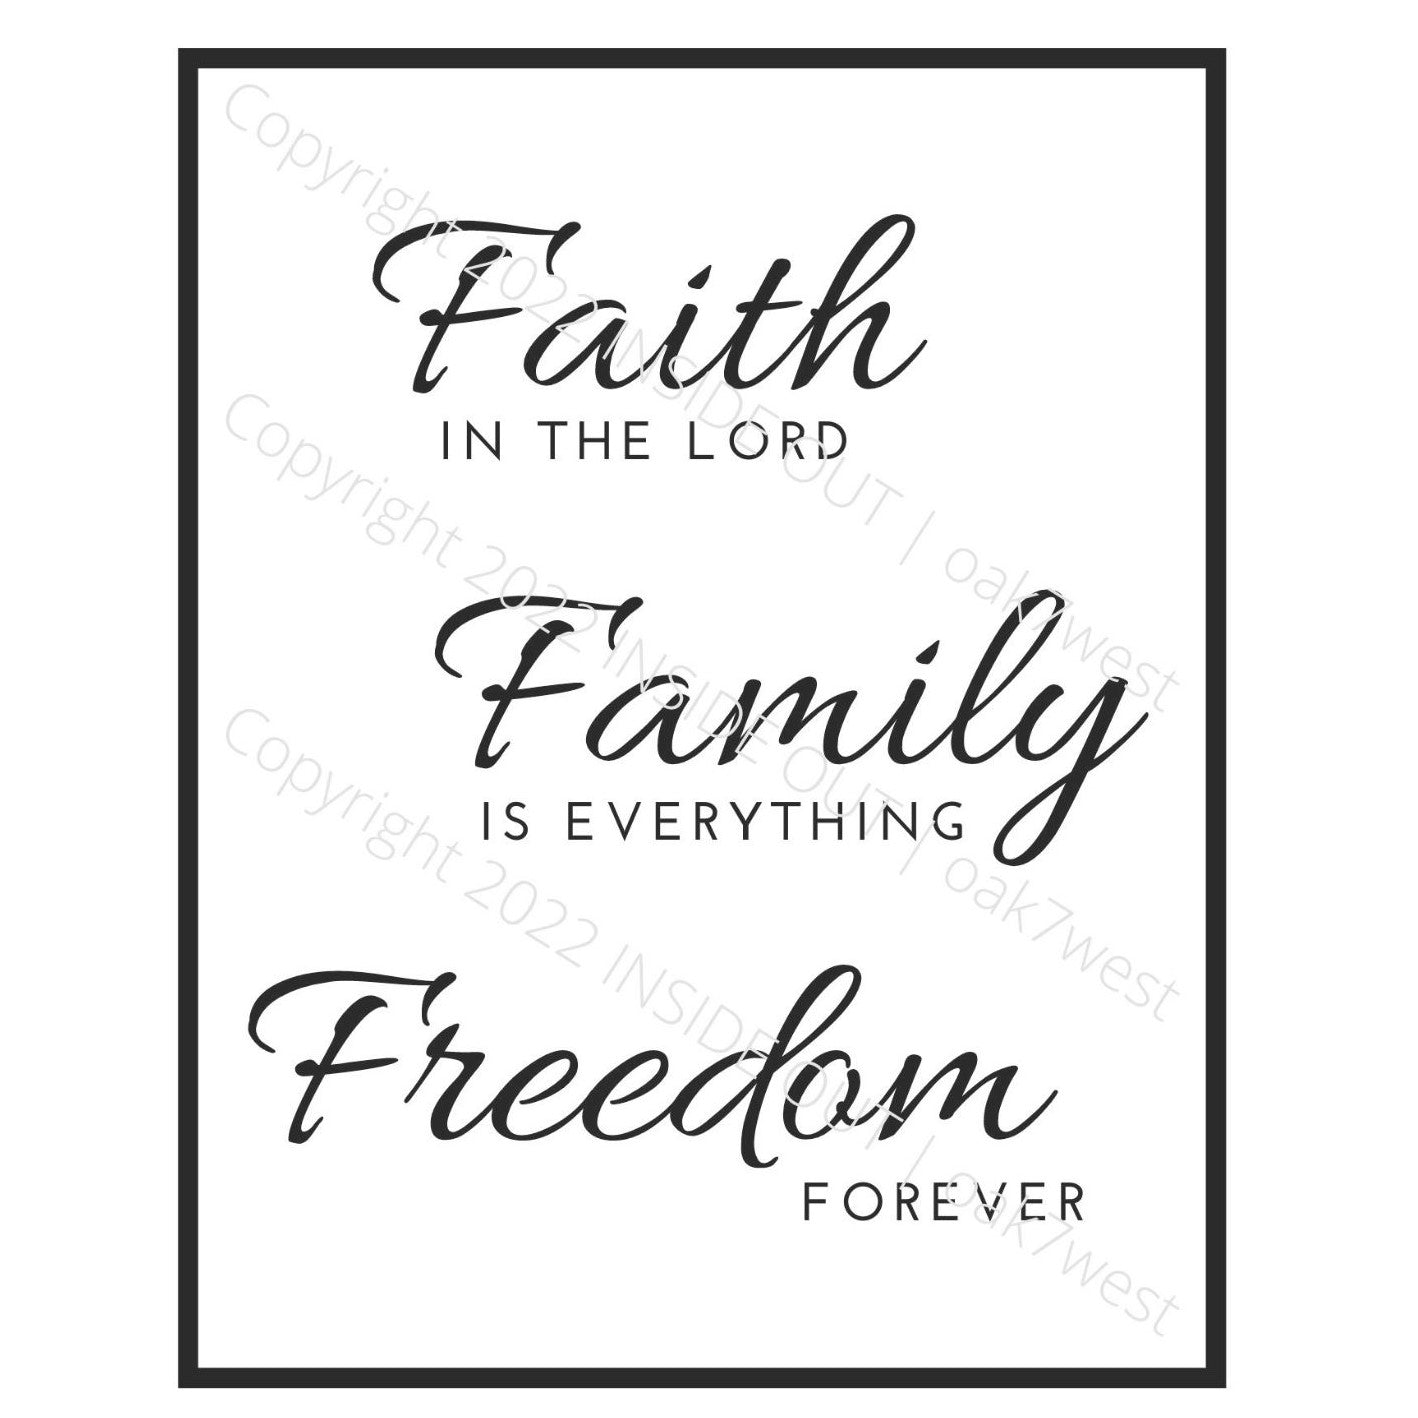 Inspirational Word Art Faith Family Freedom (printable download) | Reads... Faith IN THE LORD Family IS EVERYTHING Freedom FOREVER | Shown in Black and White with Black Border | oak7west.com